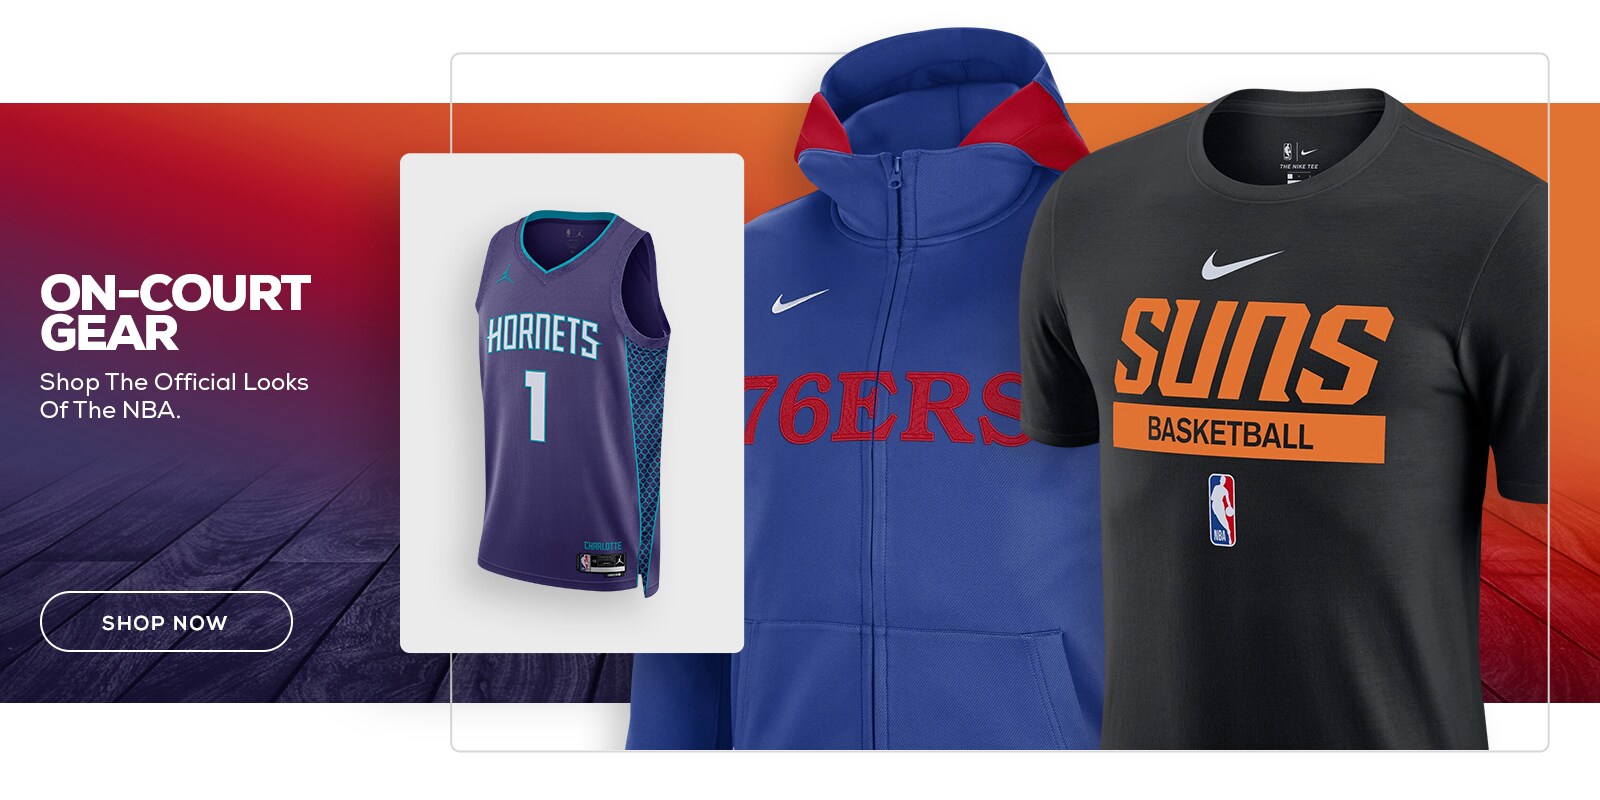 ON-COURT GEAR.  Shop The Official Looks Of The NBA.